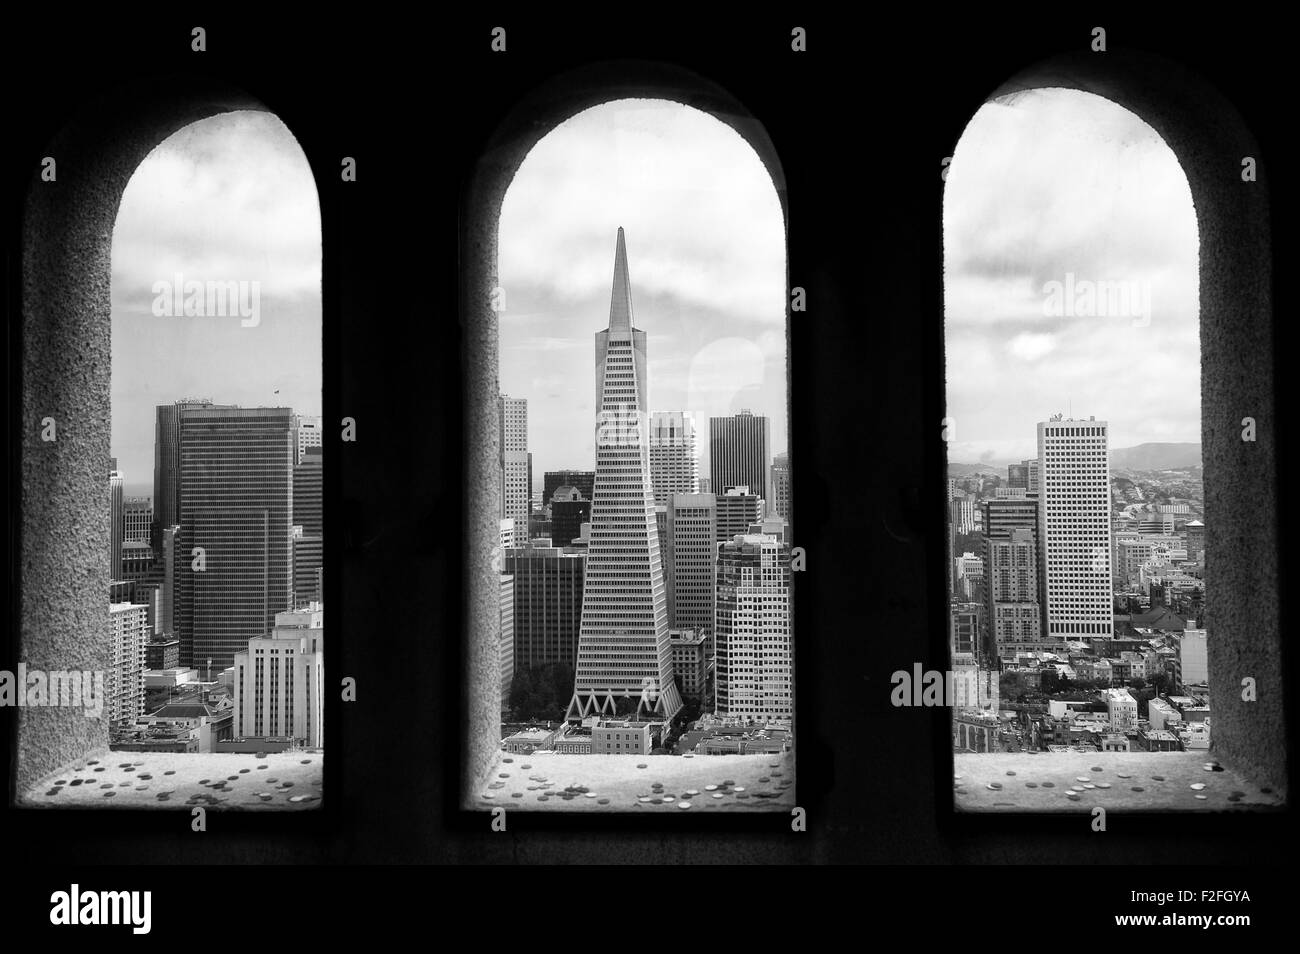 View of the city from Coit Tower in Telegraph Hill, San Francisco, California. Stock Photo